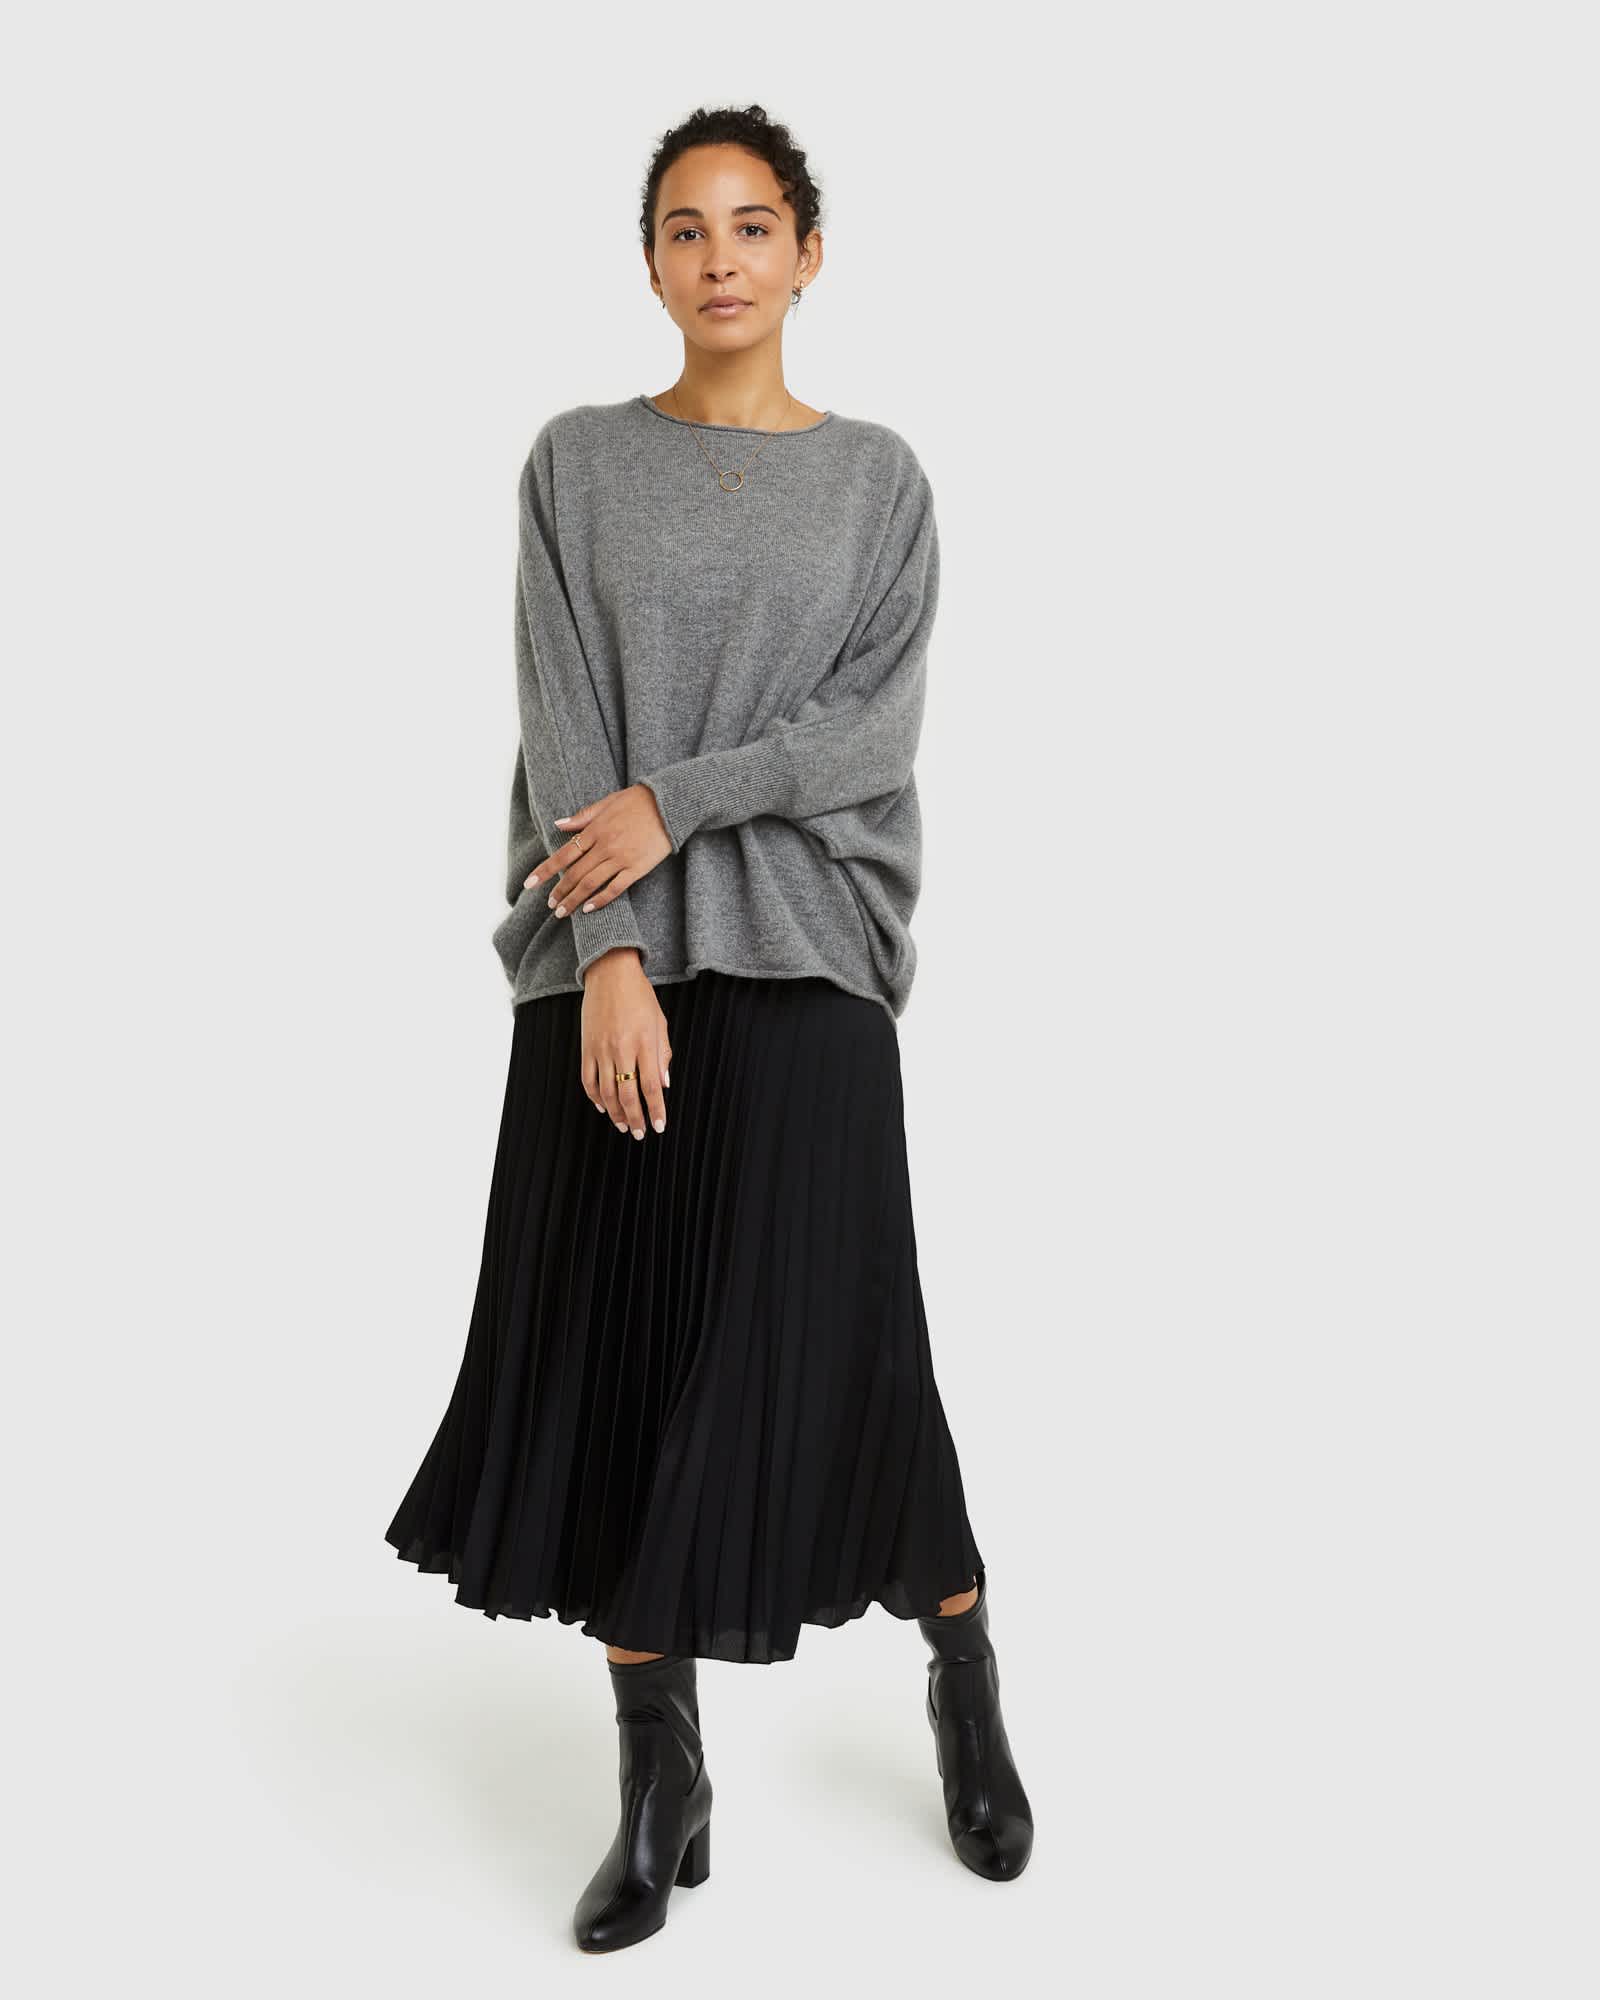 Woman wearing batwing sweater made from cashmere in grey from the front